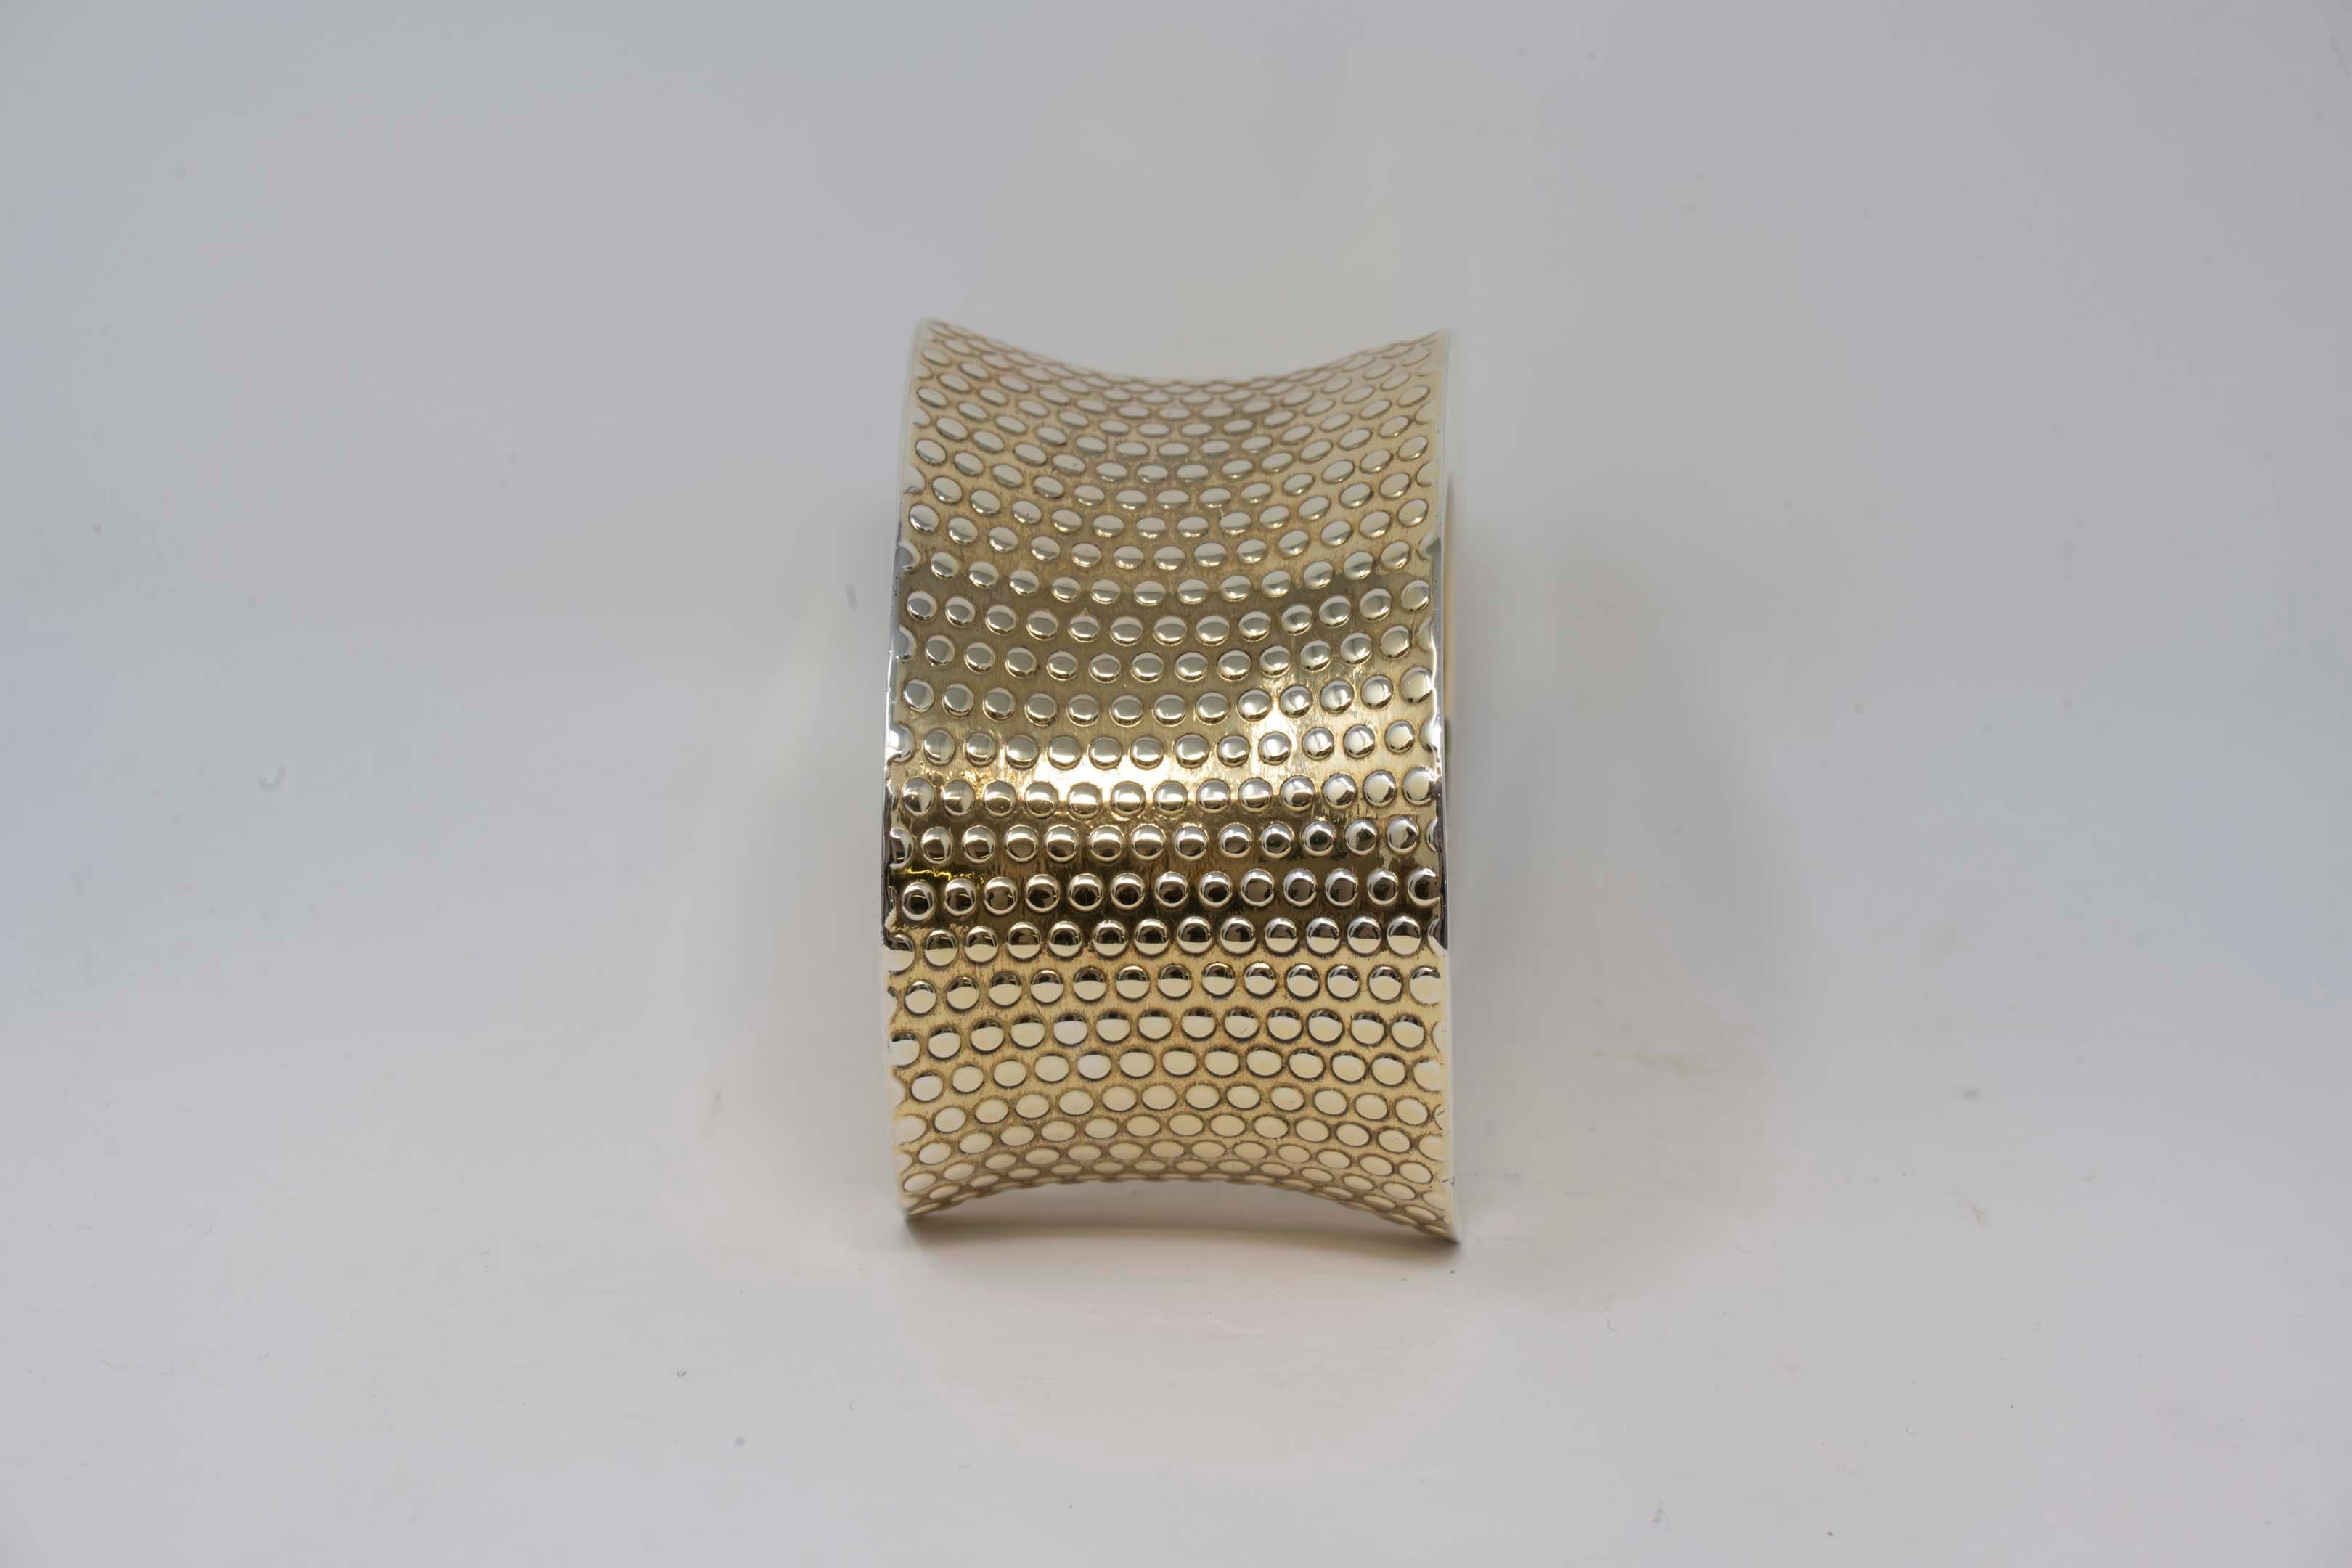 Sterling silver and Vermeil cuff bracelet signed A.F. design and is 925 silver. The bracelet is very large and impressive. It is hallmarked on the inside. The item measures 1 1/2 inches wide, it will fit a 6 1/2 inch wrist.
